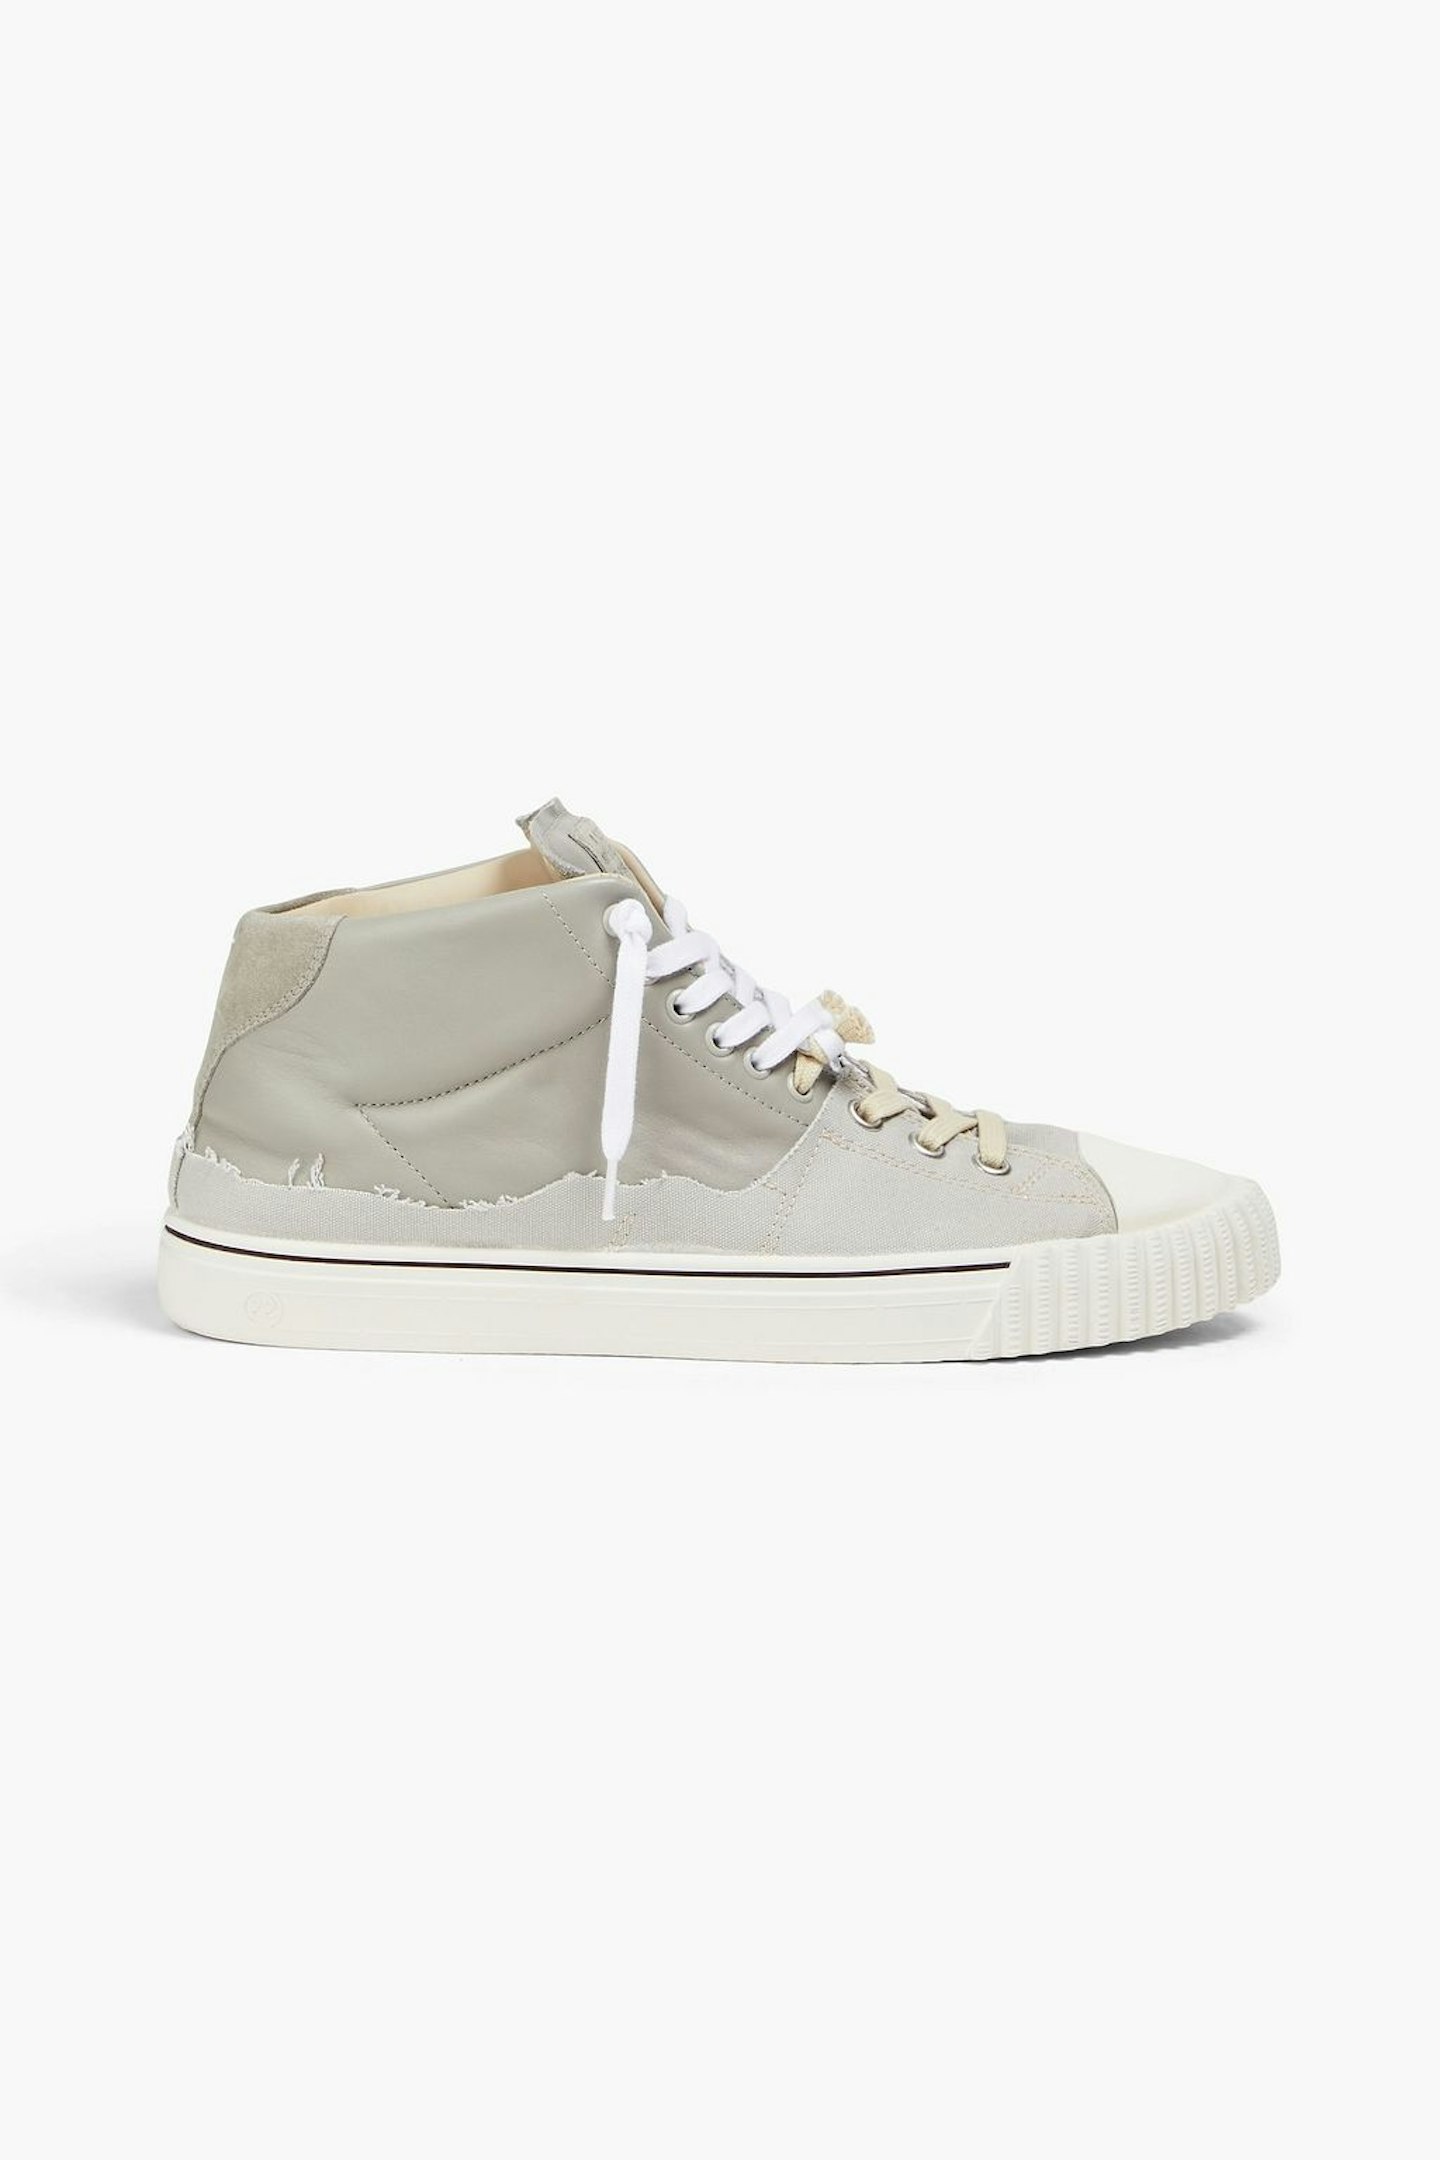 Maison Margiela, Leather and Suede High-Top Sneakers